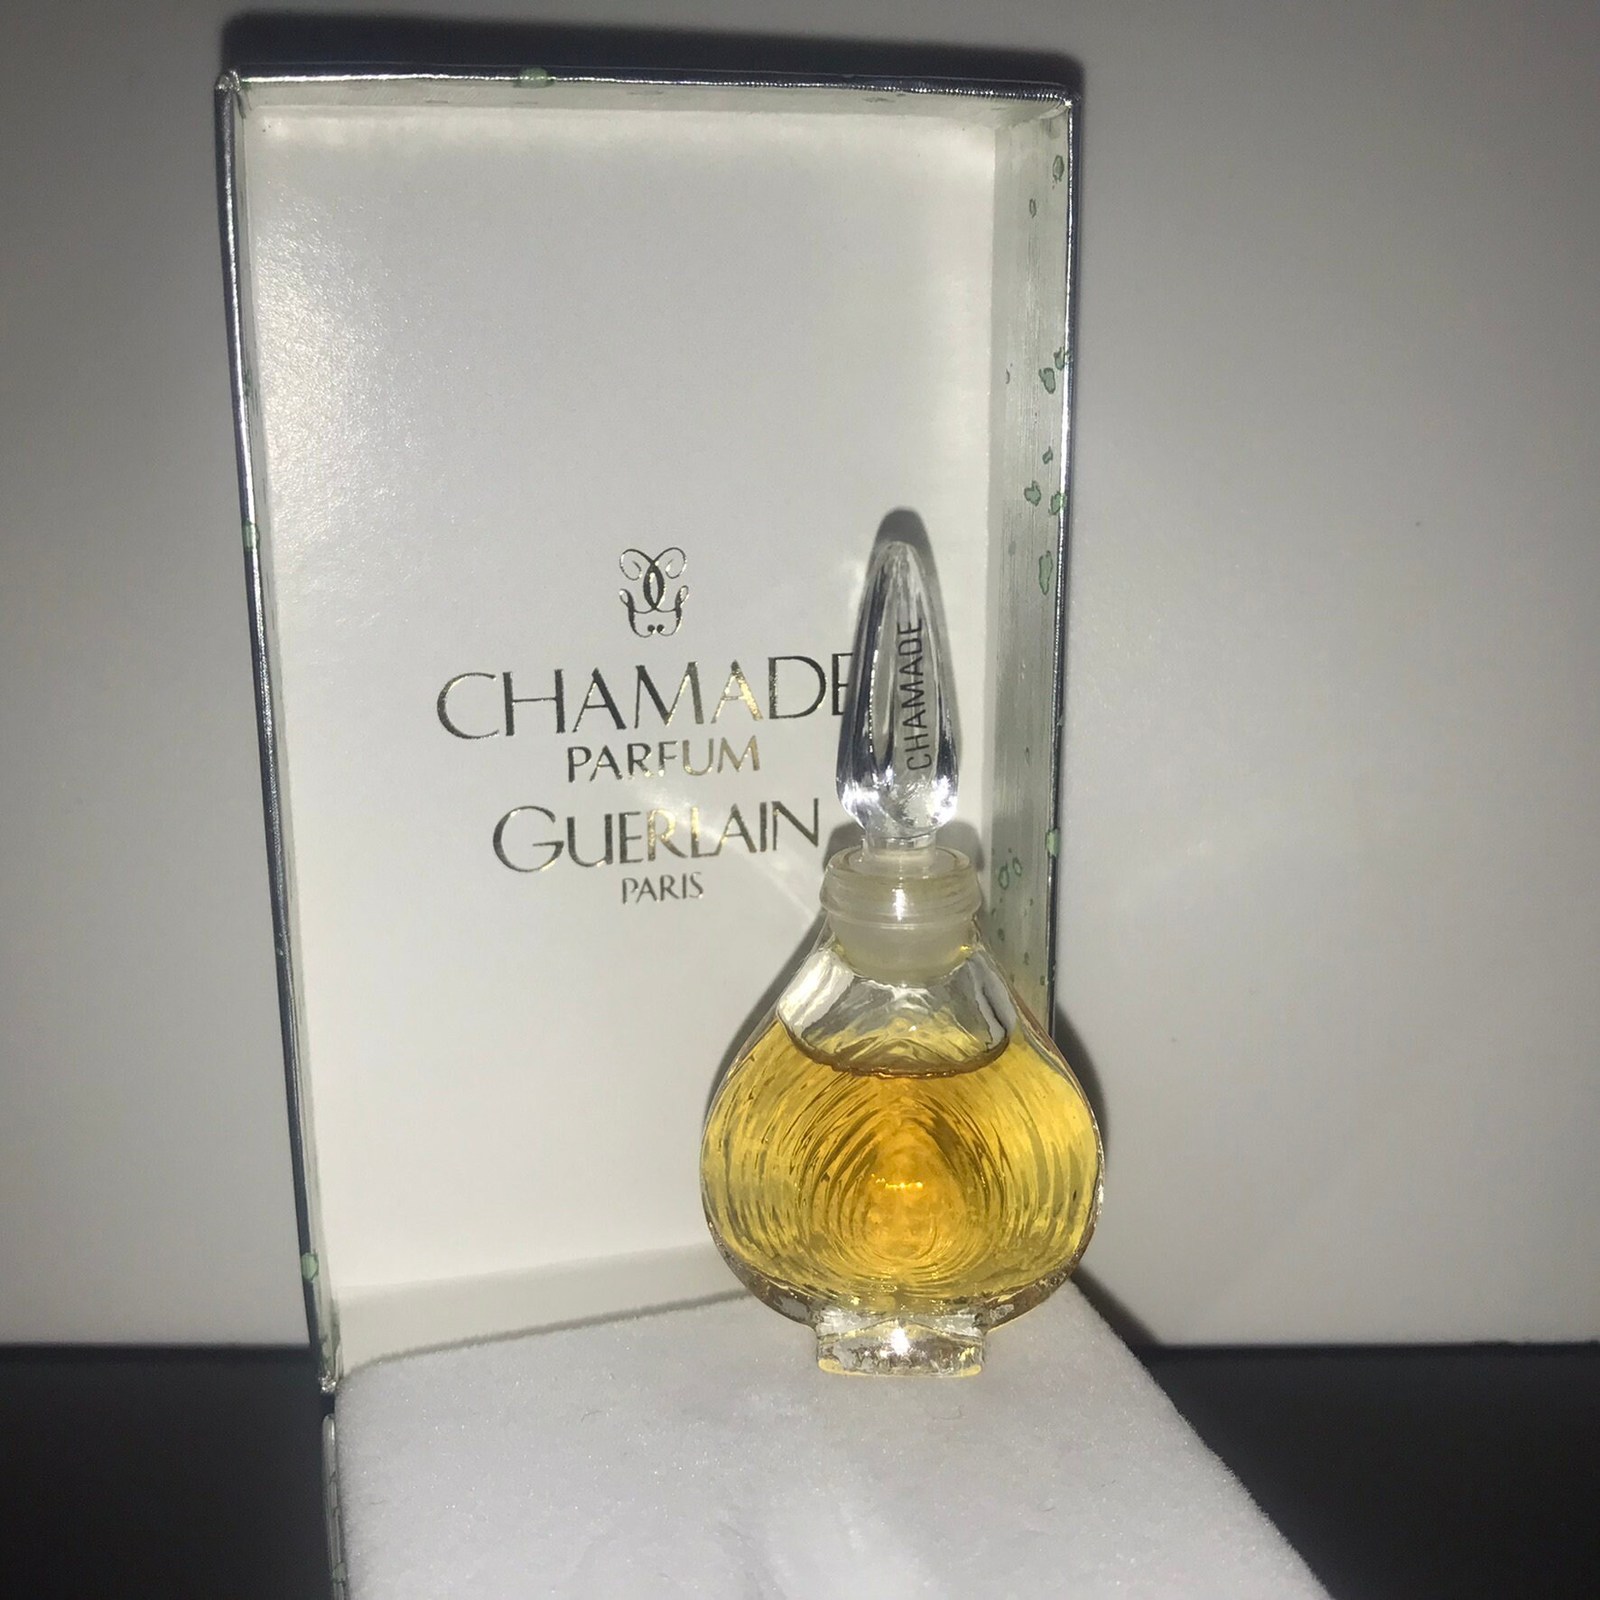 Guerlain Chamade pure perfume 2 ml RARITY * VINTAGE * EXTRAIT * must have! colle - $142.00